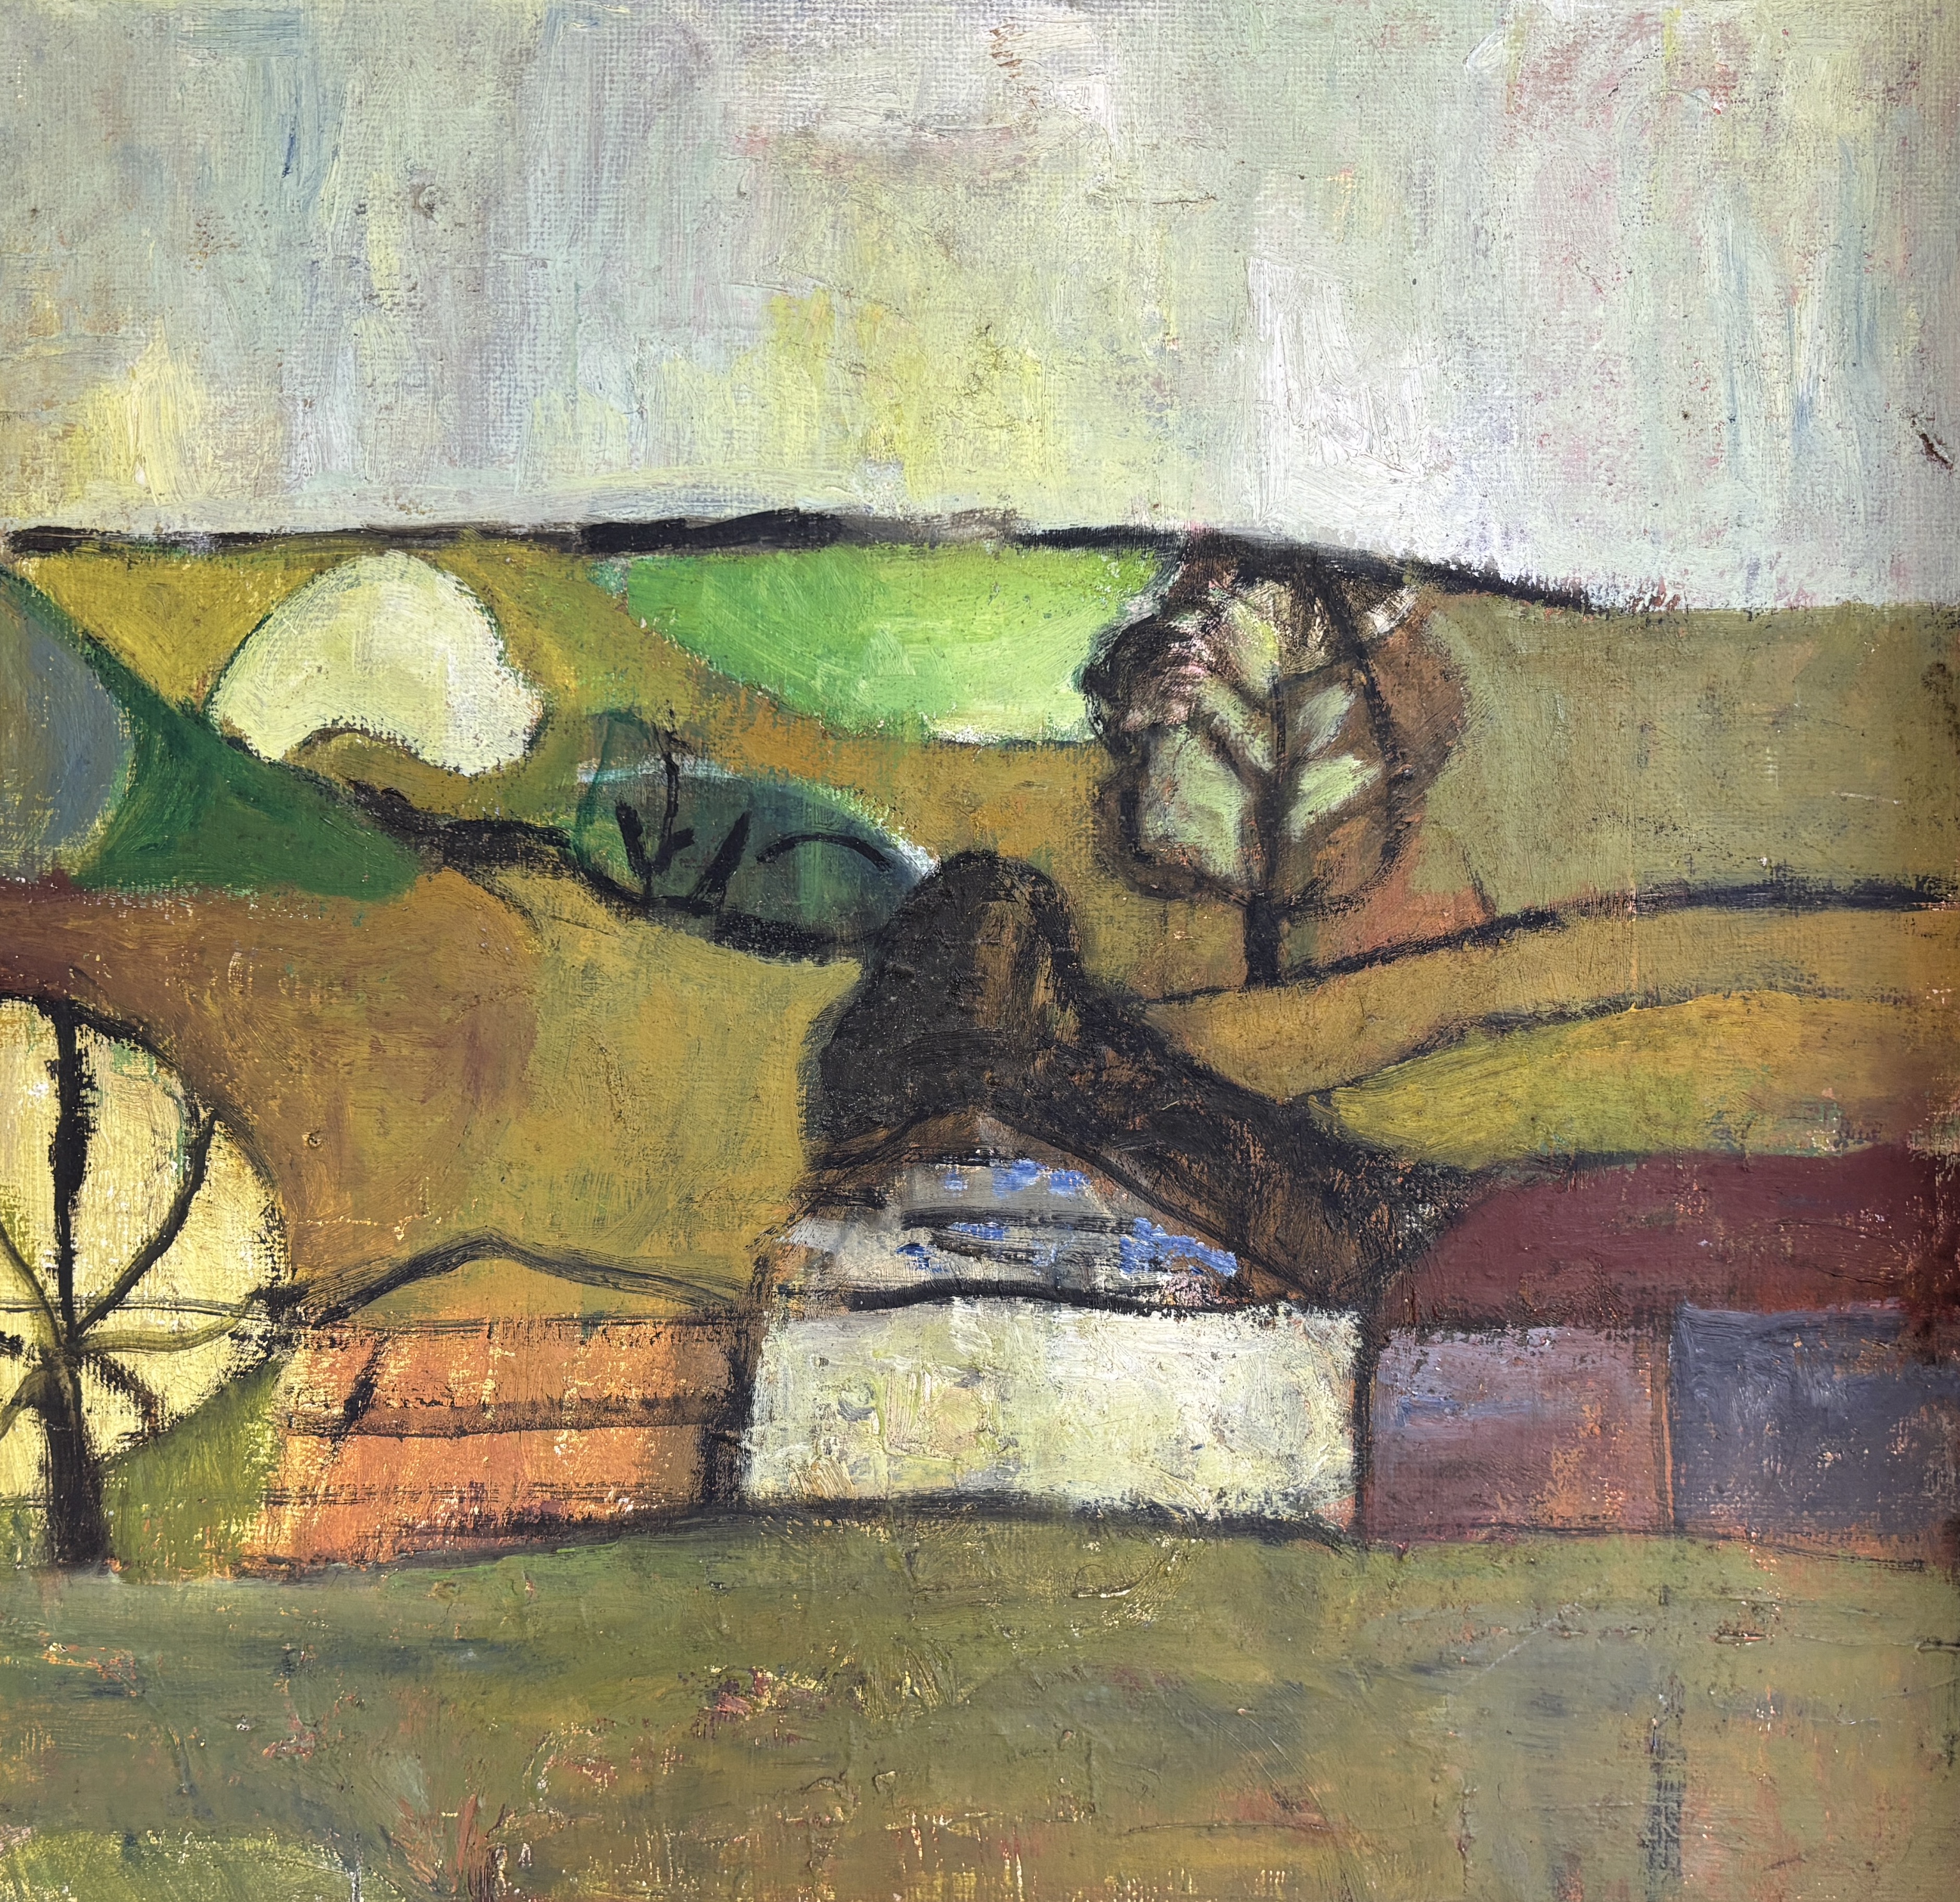 Abstract oil on canvas board, ‘Ashton Vale Bristol’, unsigned, inscribed verso, 38 x 39cm, unframed